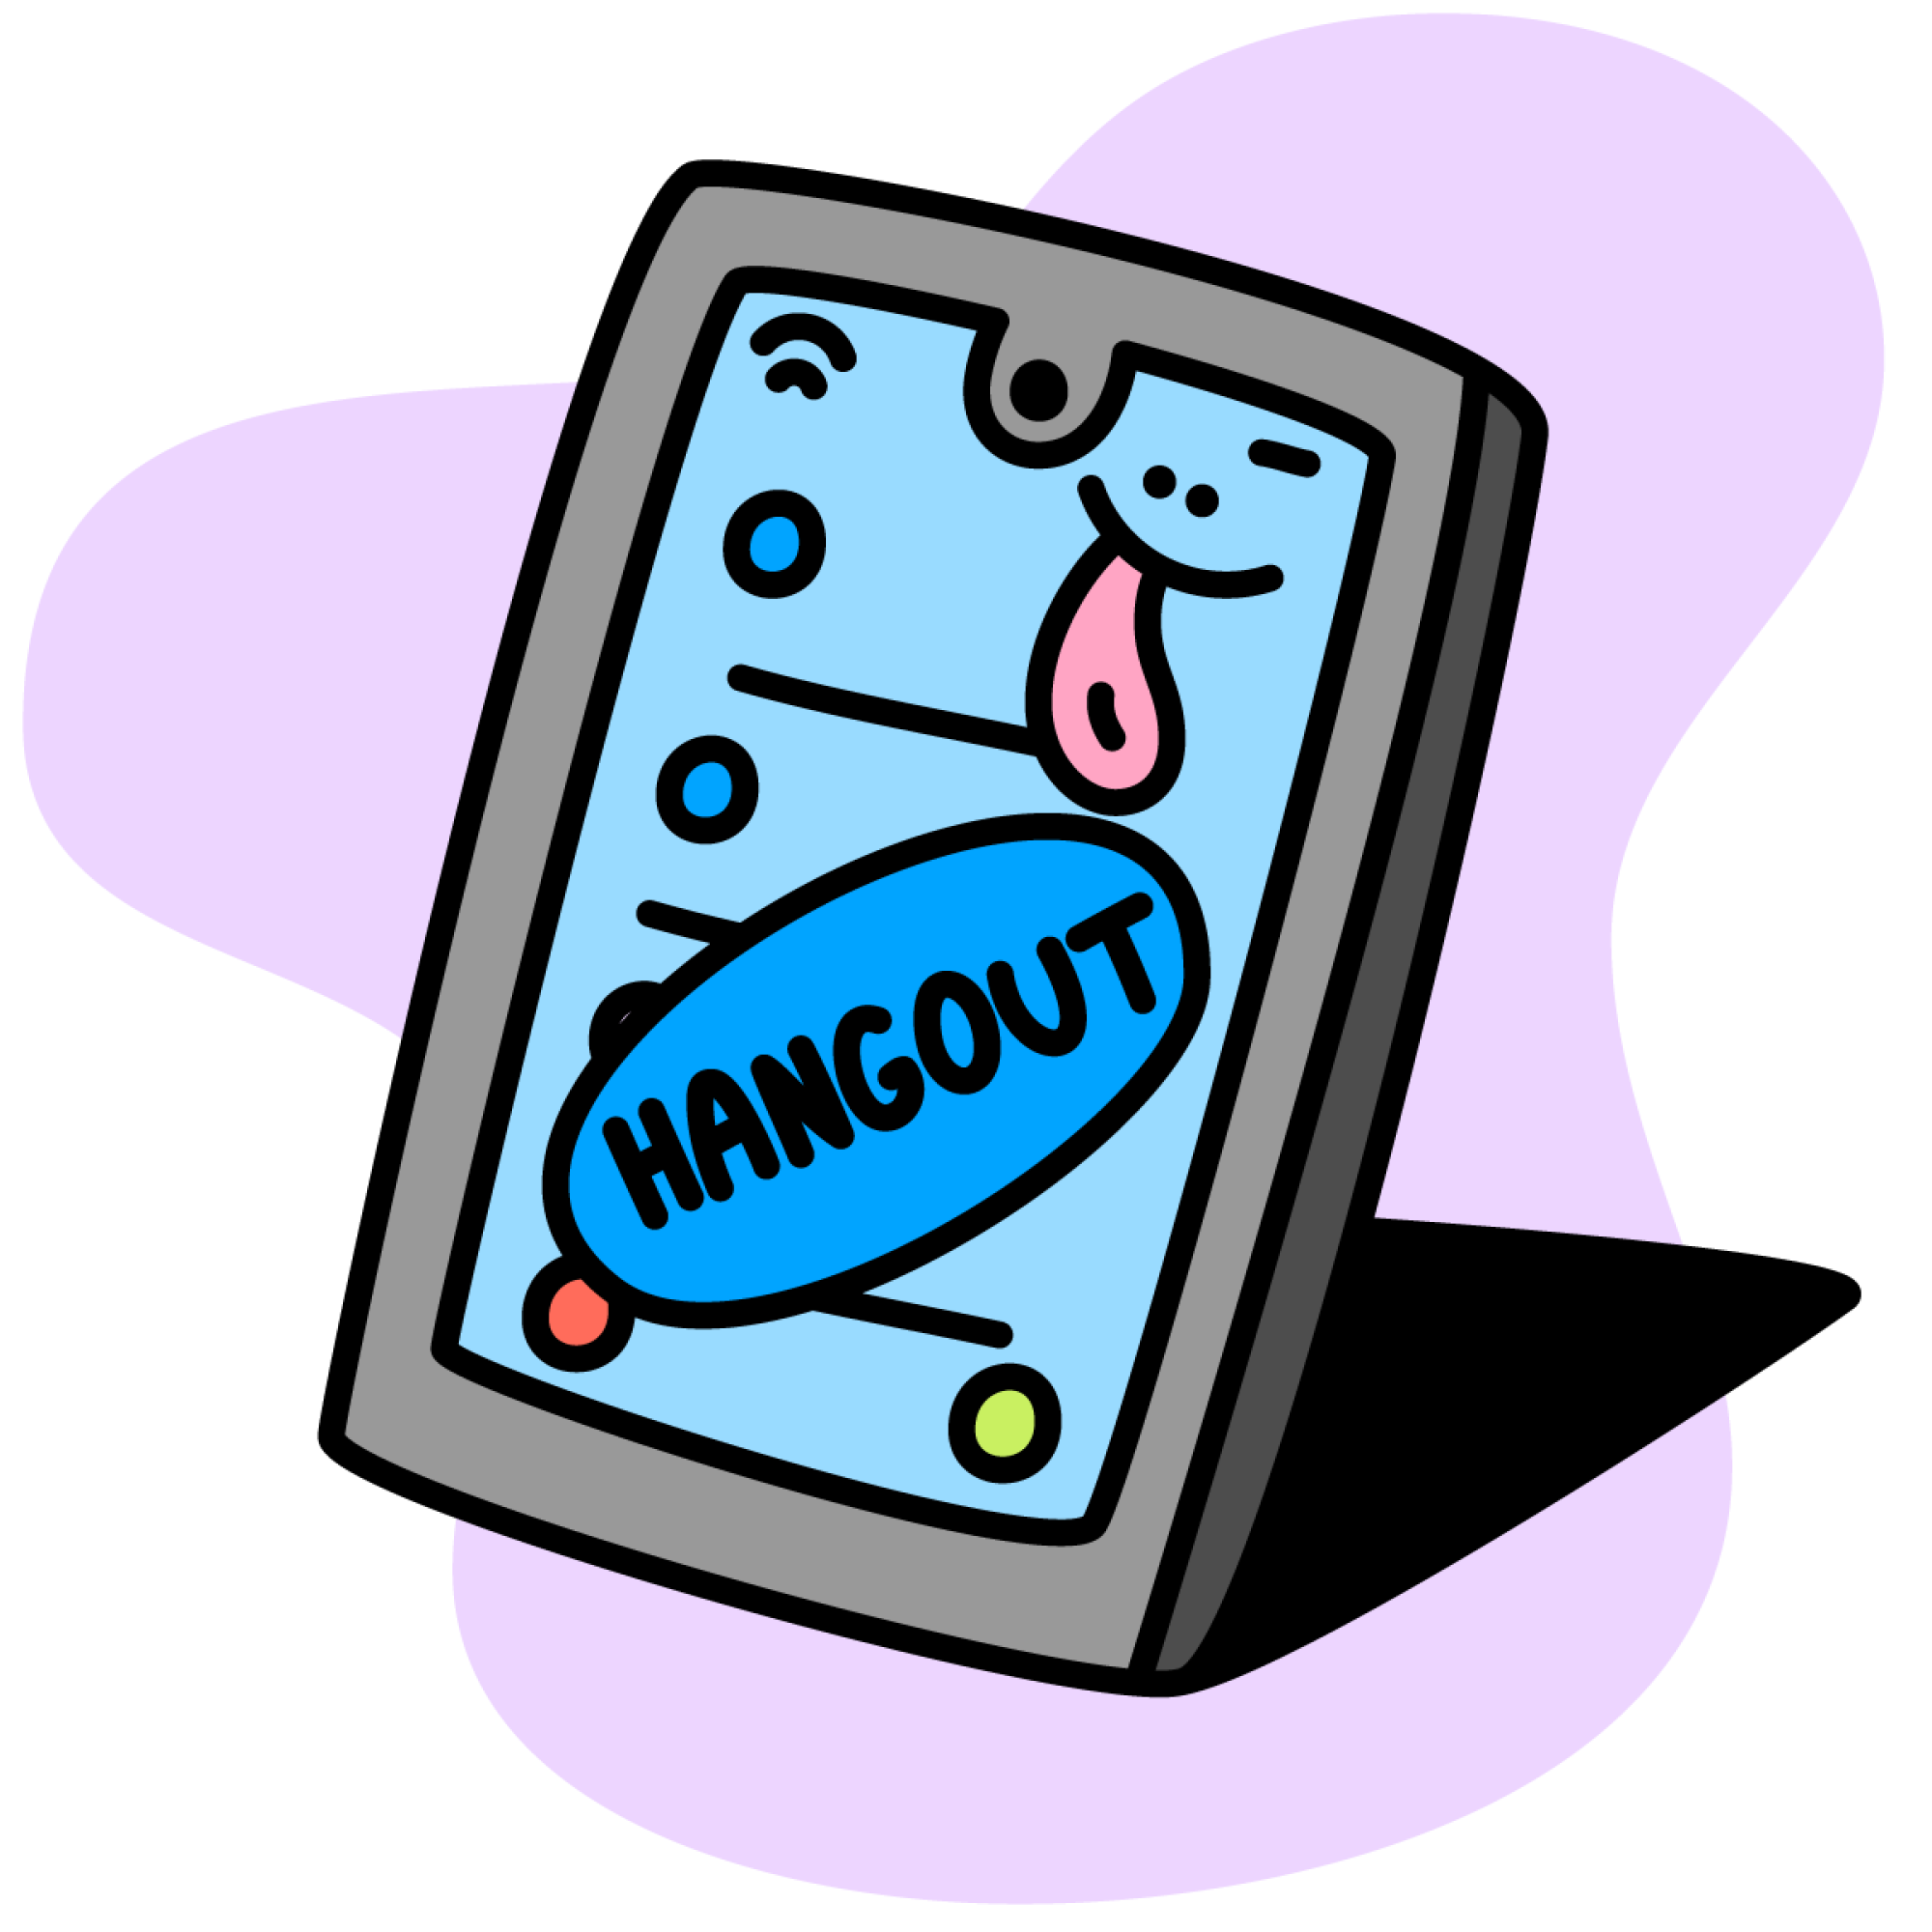 Illustration of a phone with text messages on the screen